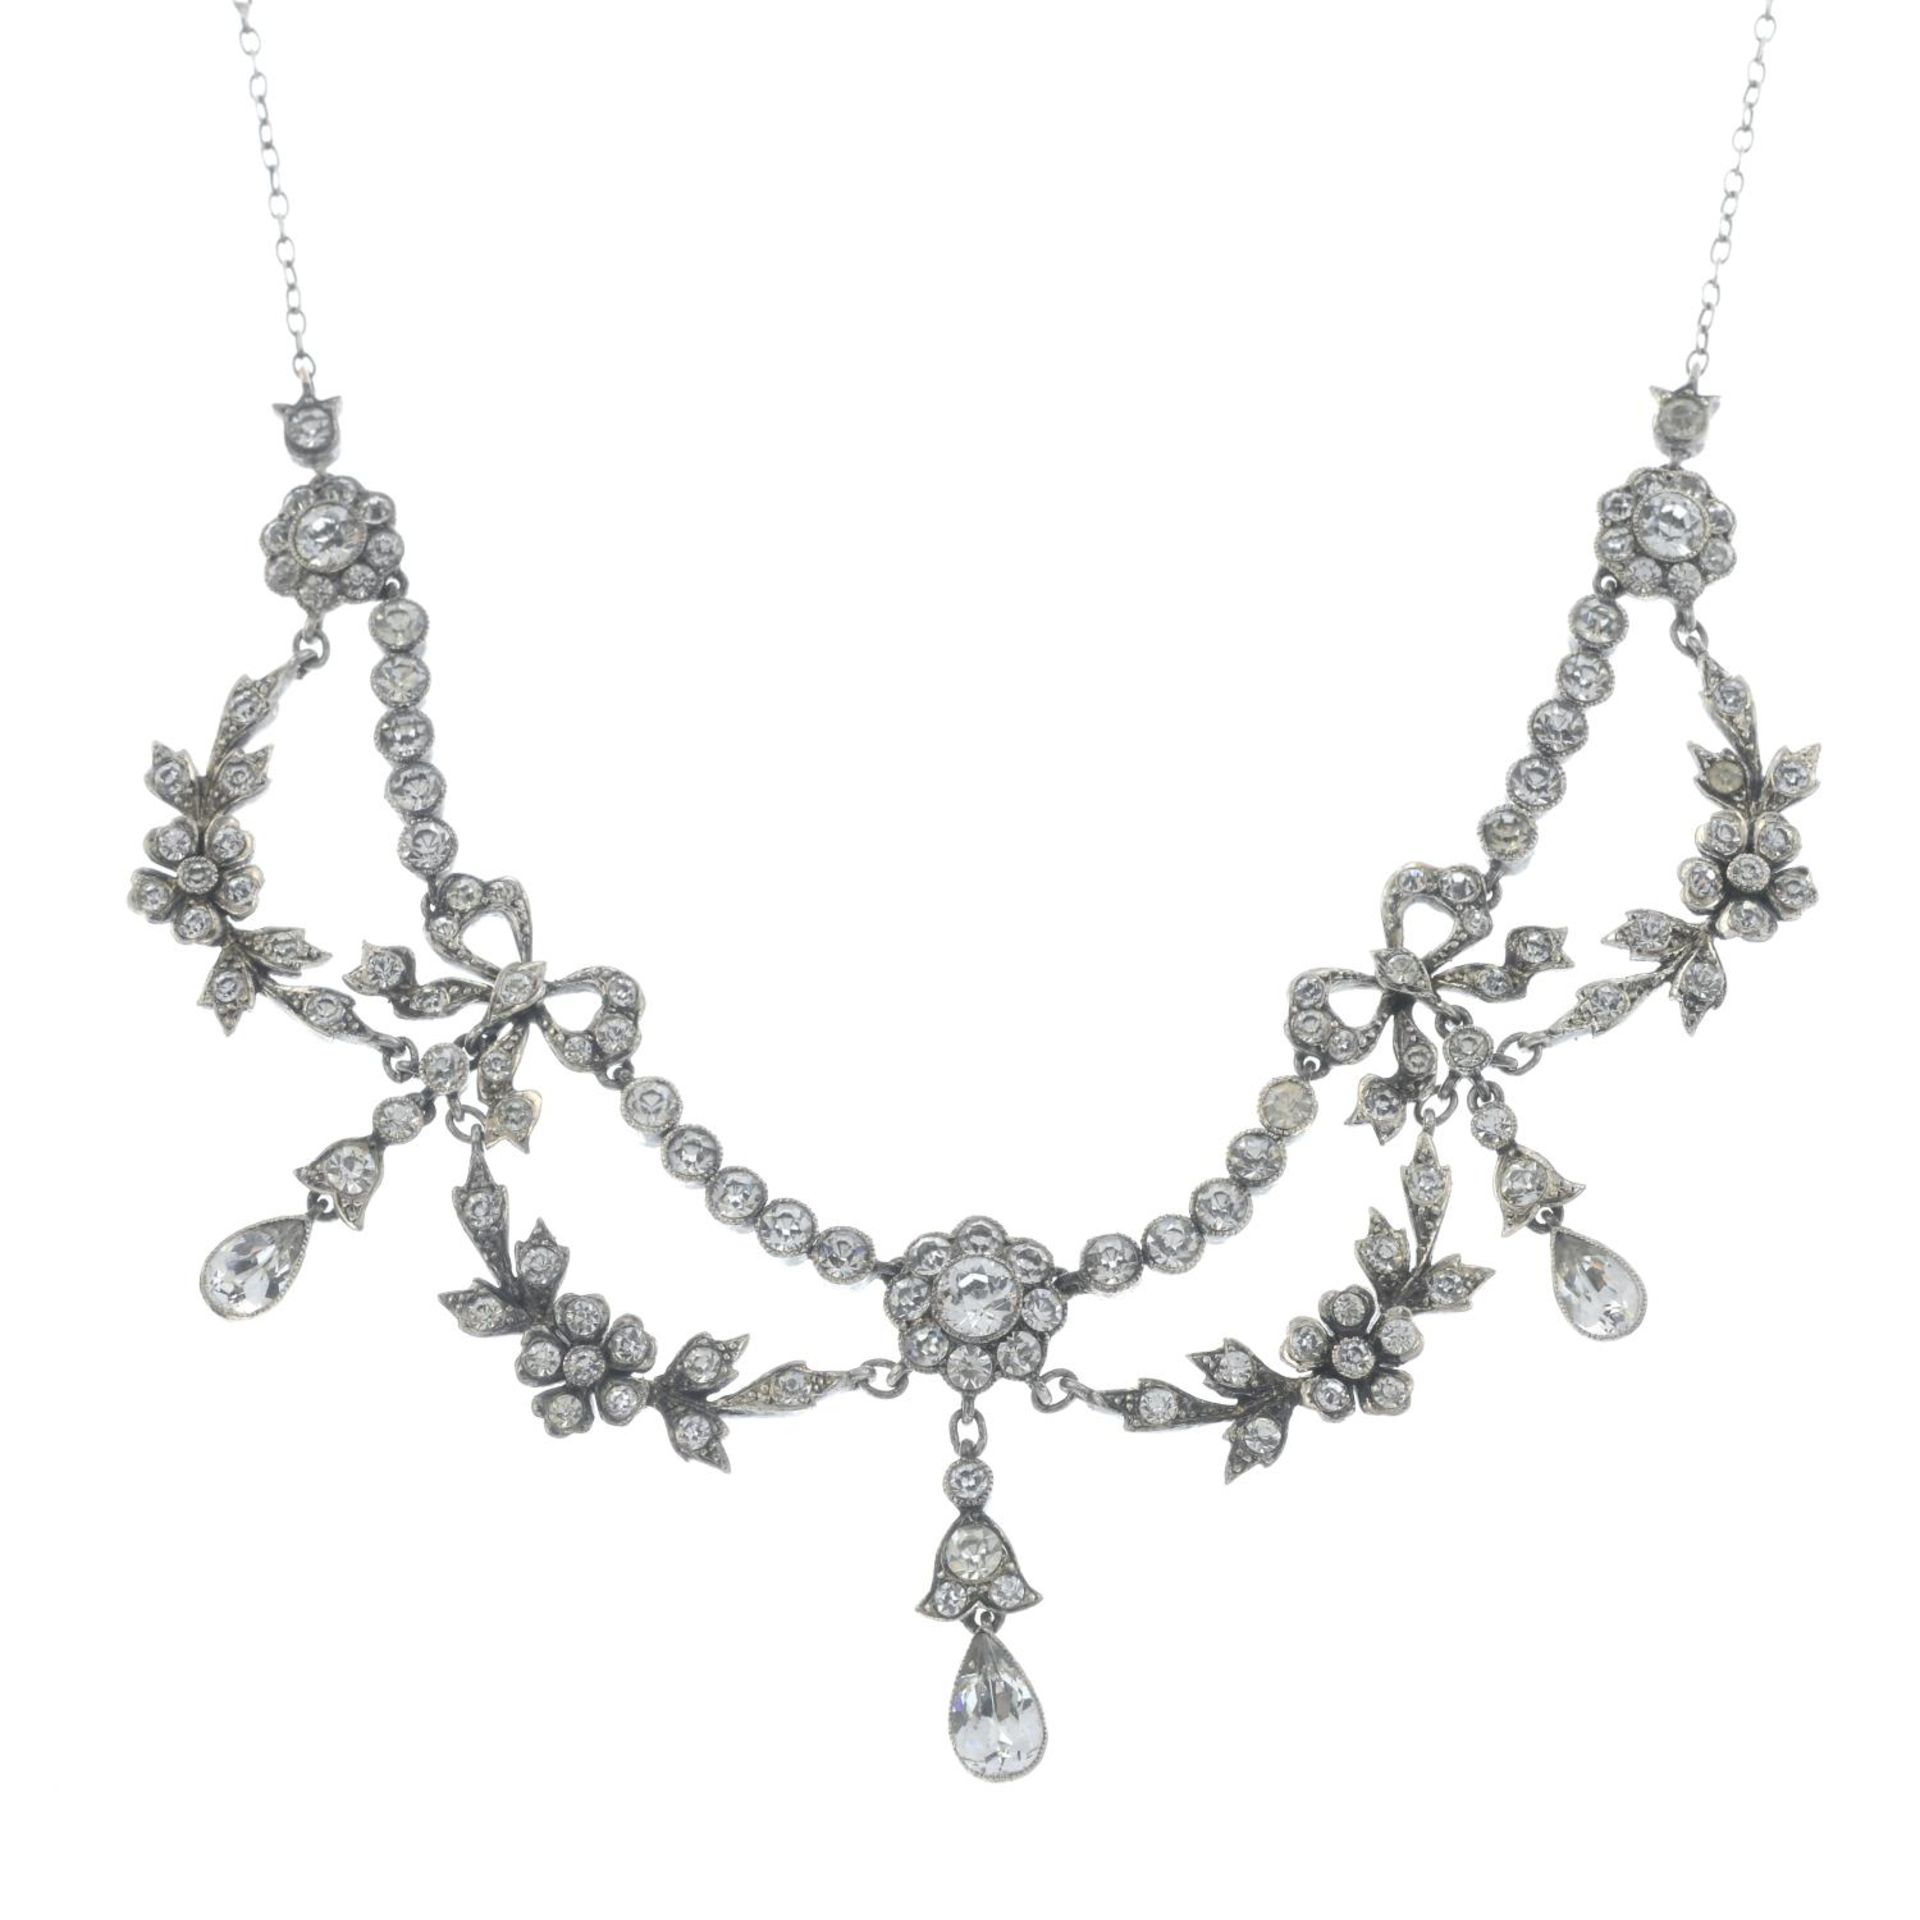 An early 20th century floral paste necklace with bow detail.Stamped 925.